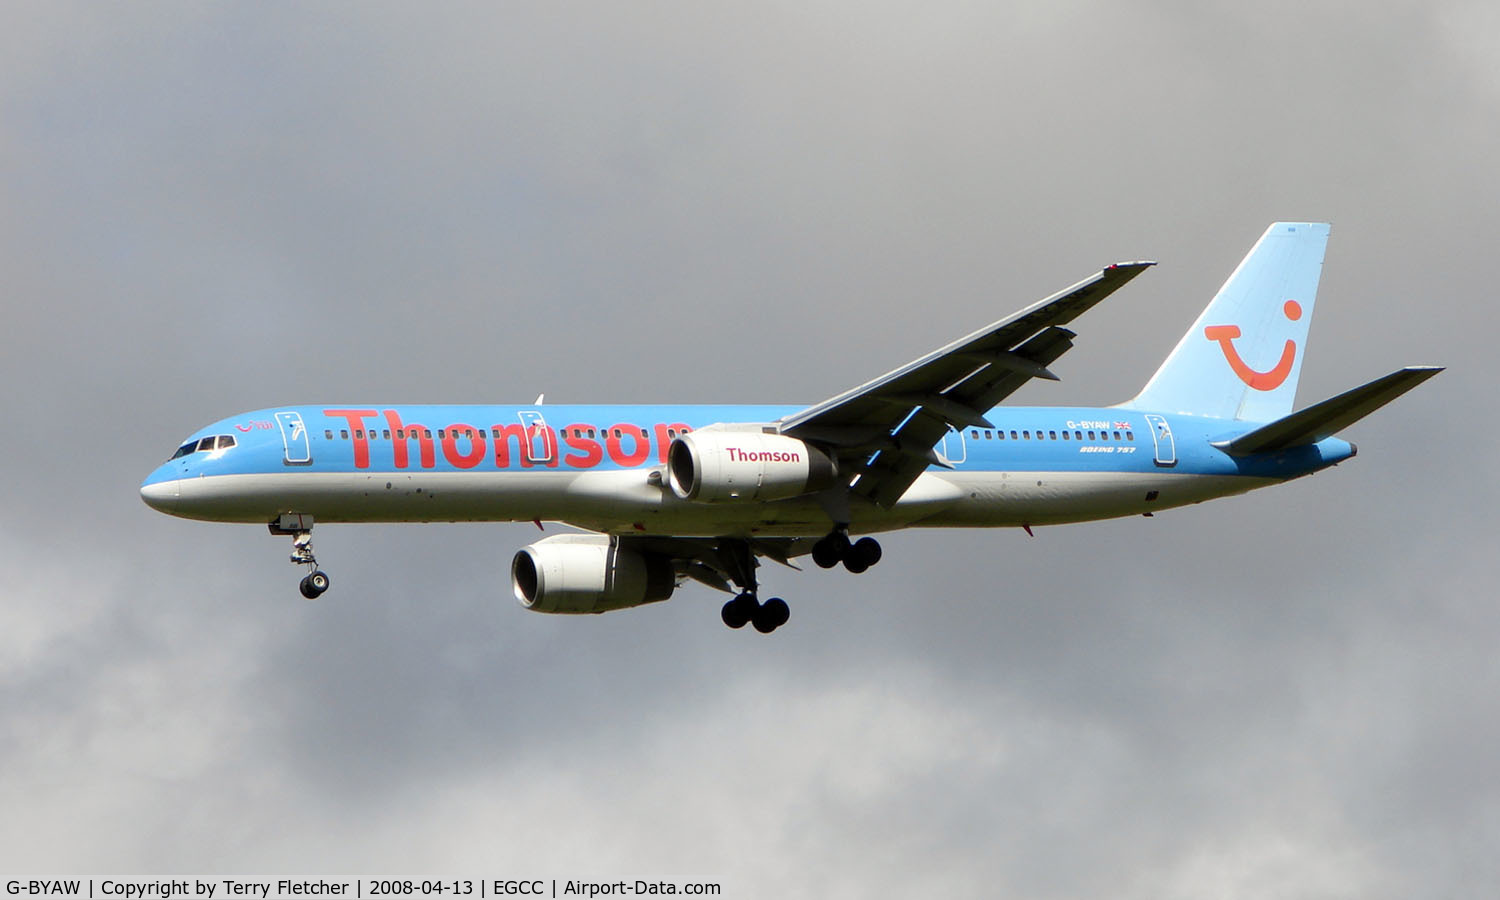 G-BYAW, 1995 Boeing 757-204 C/N 27234, Thomson B757 arriving at Manchester in April 2008